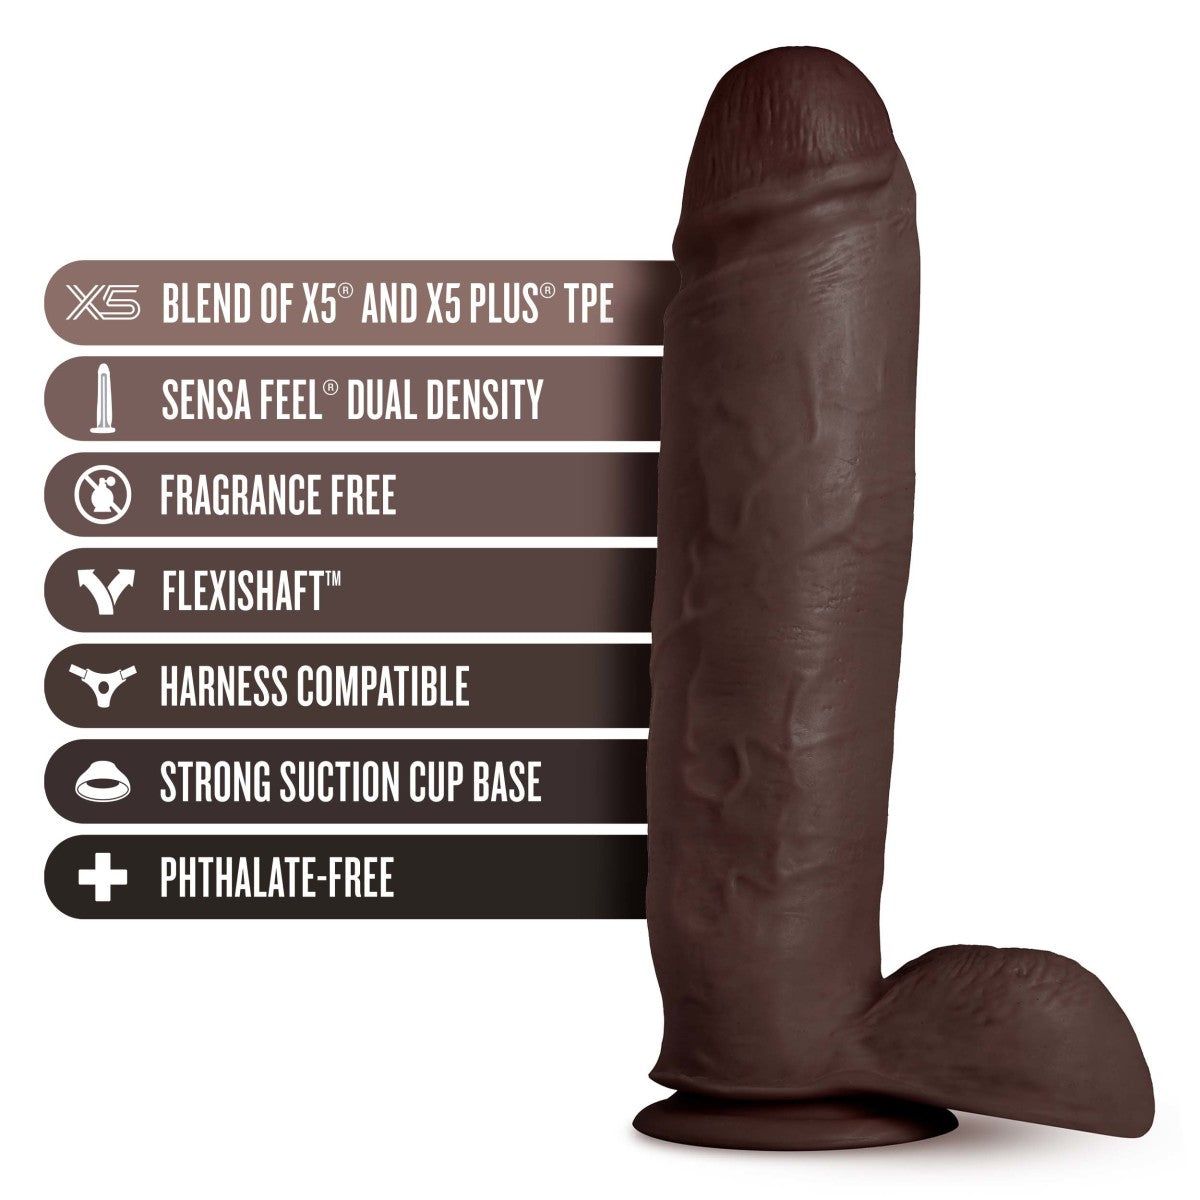 Au Naturel Huge Realistic Chocolate 10.5-Inch Long Dildo With Balls & Suction Cup Base